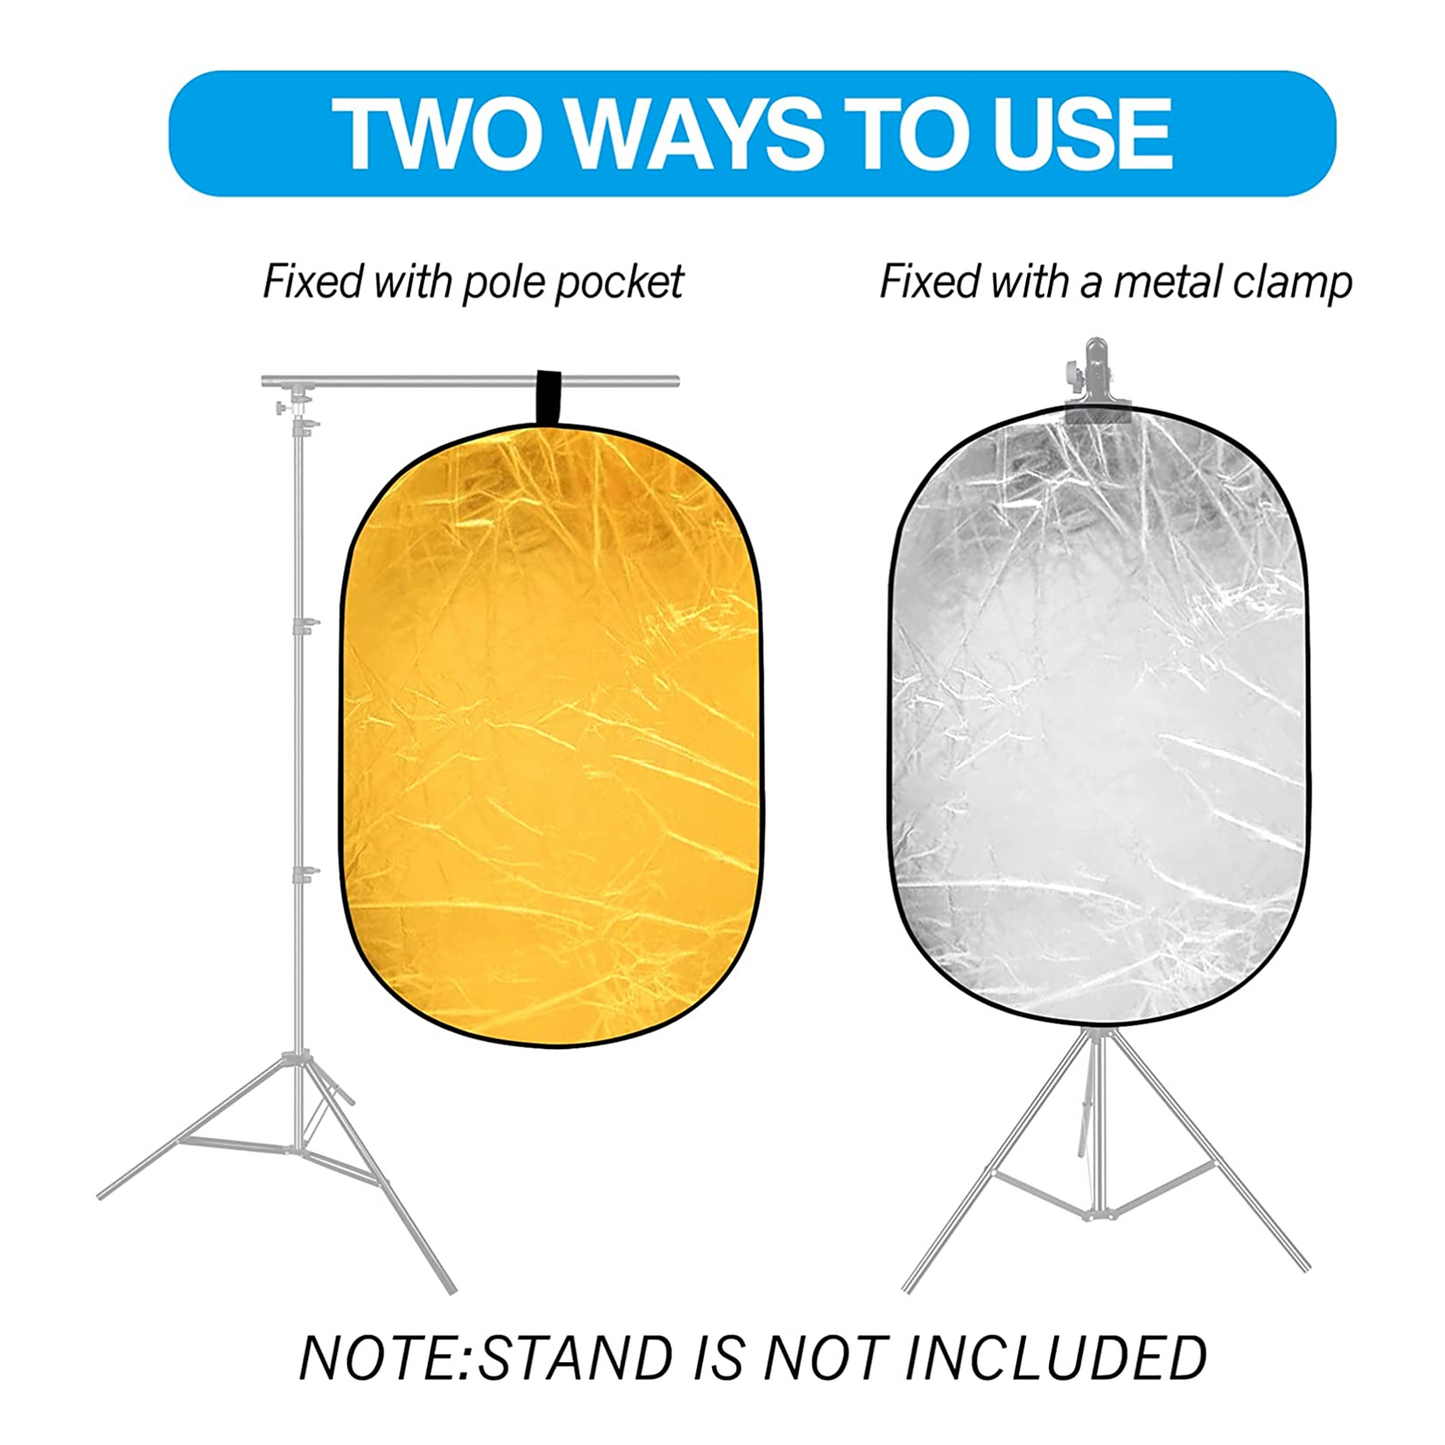 EMART 5-in-1 Oval Reflector Photography, 24'' x 36'' Portable Collapsible Lighting Reflector with Carrying Bag - EMART INTERNATIONAL, INC (Official Website)